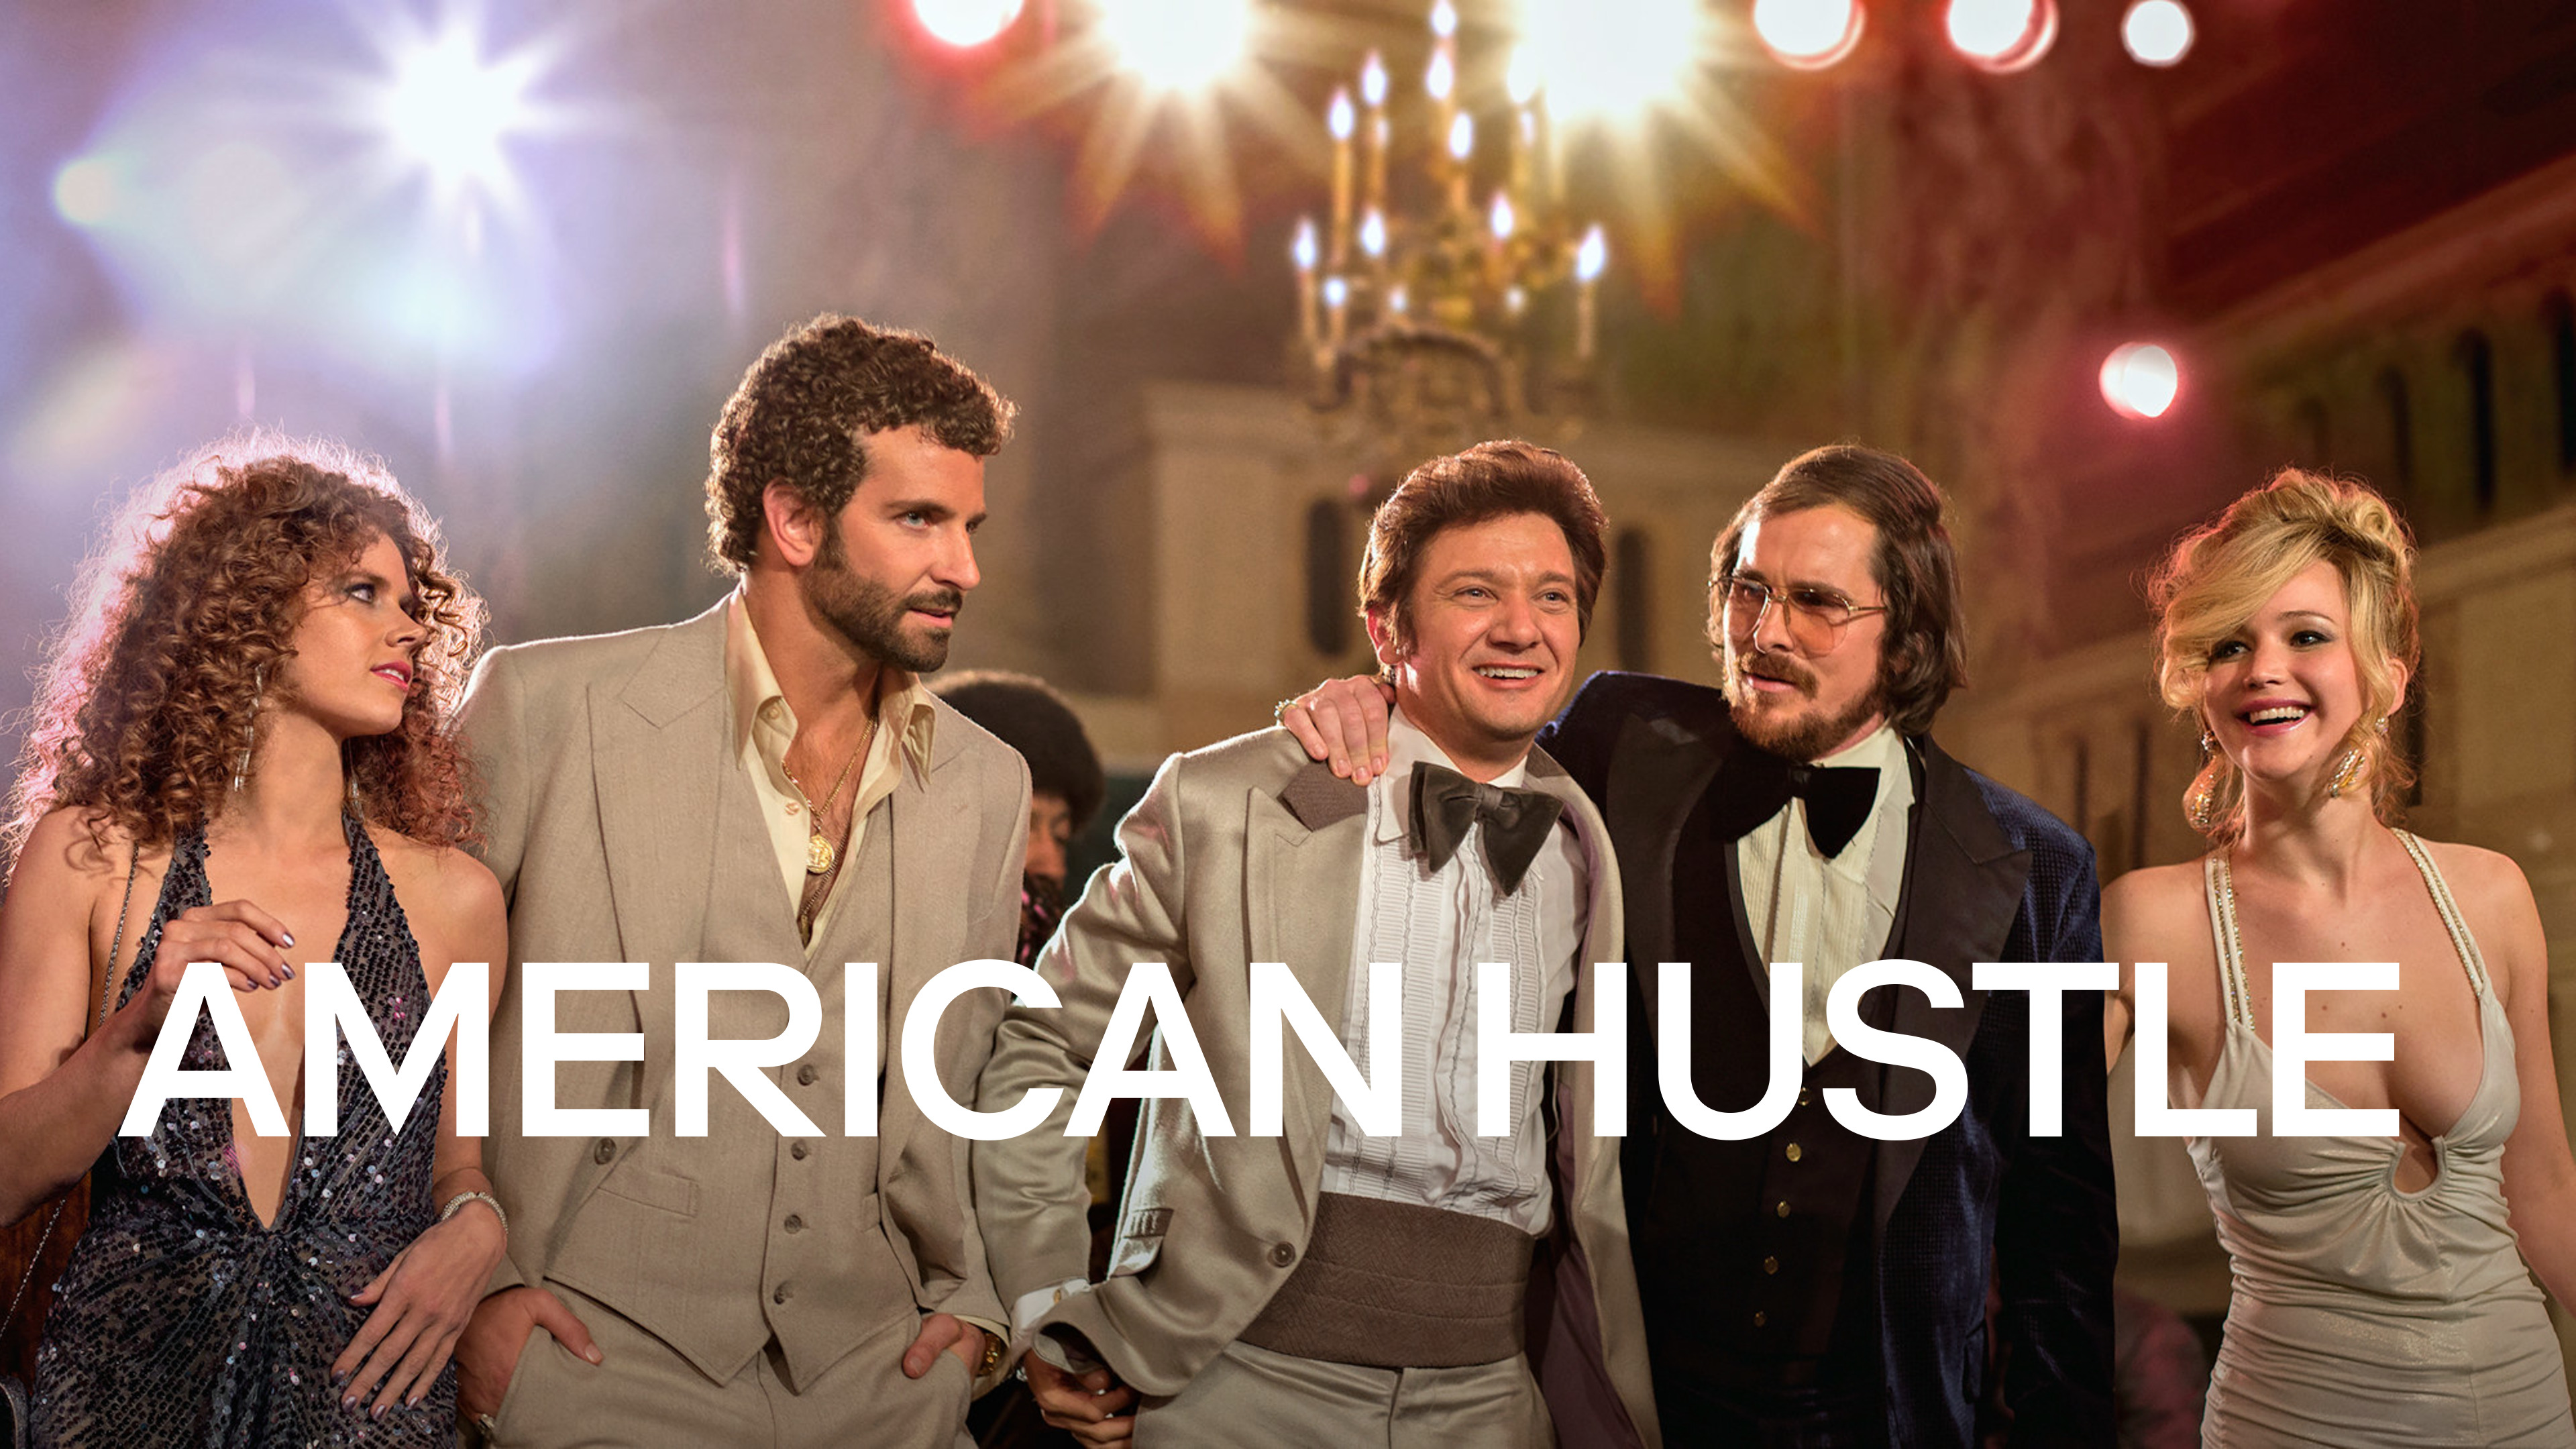 33-facts-about-the-movie-american-hustle